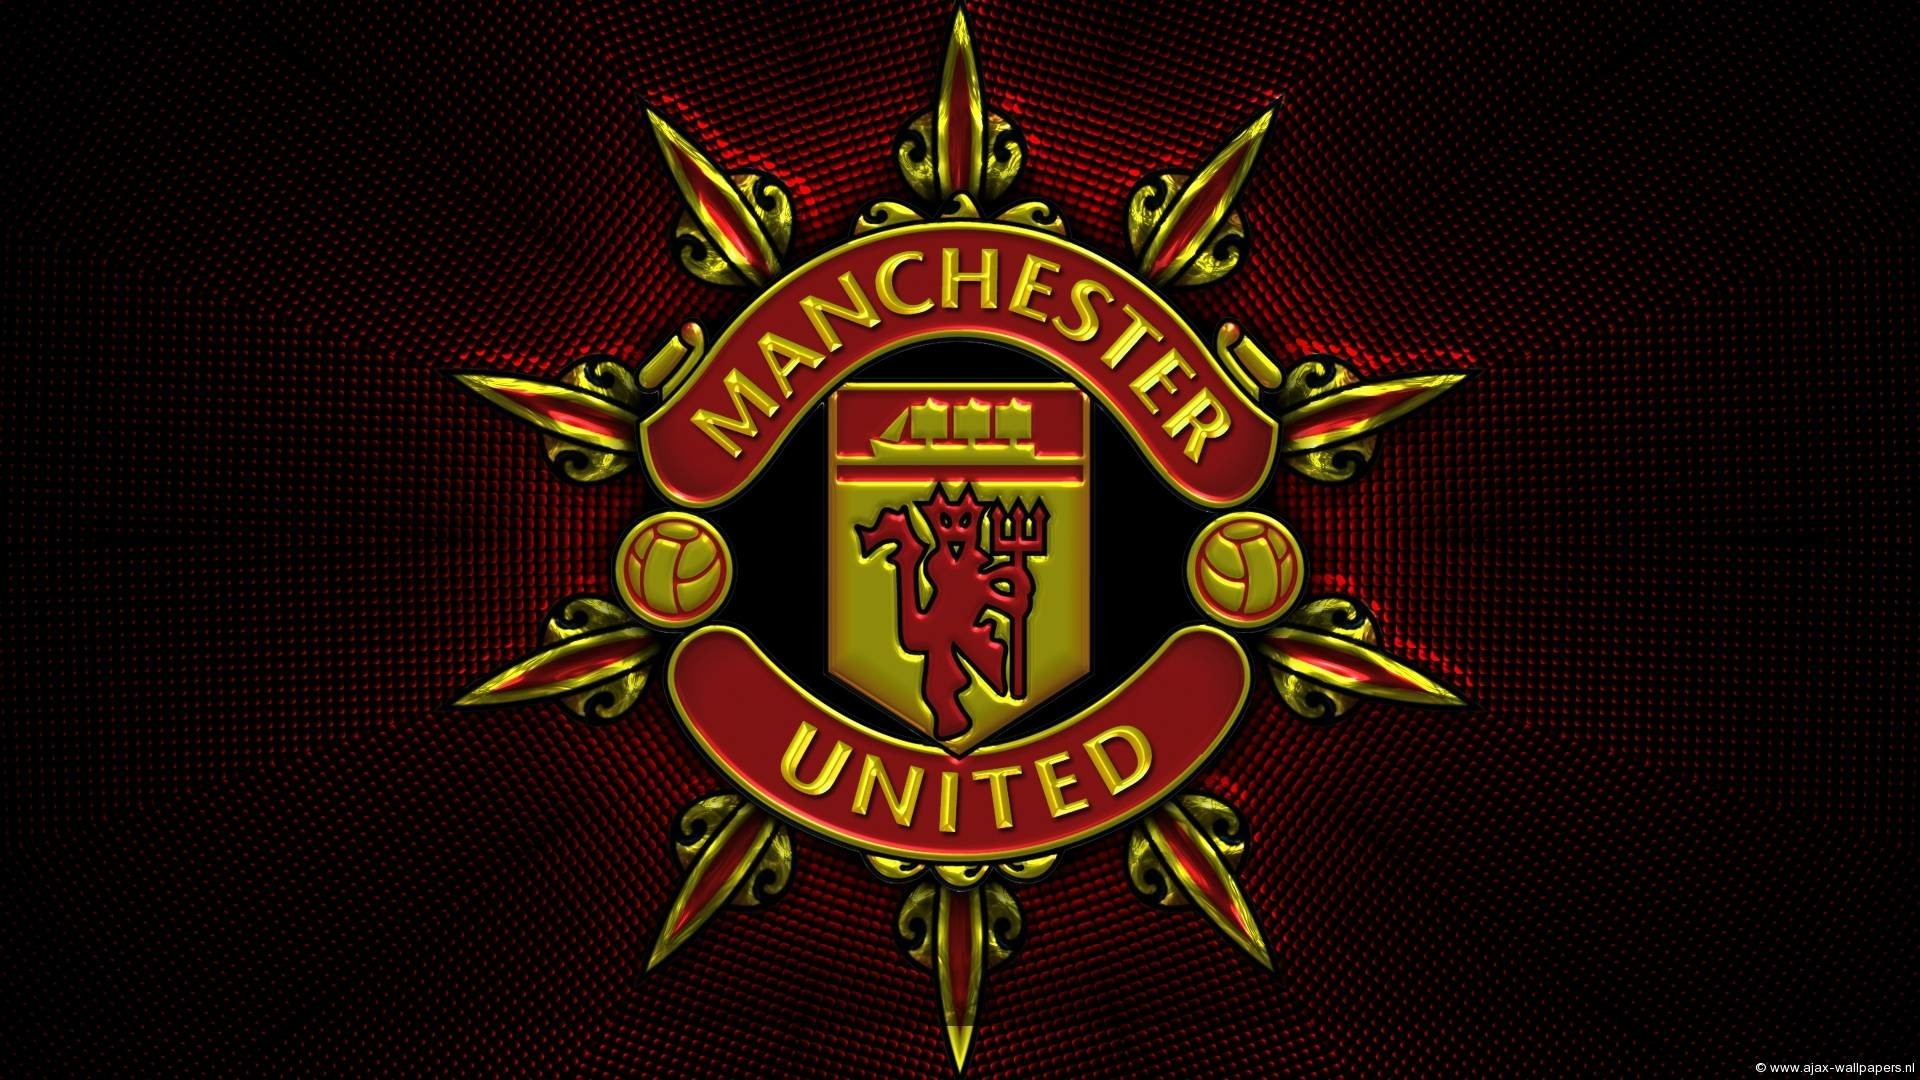 Manchester united logo wallpaper pictures